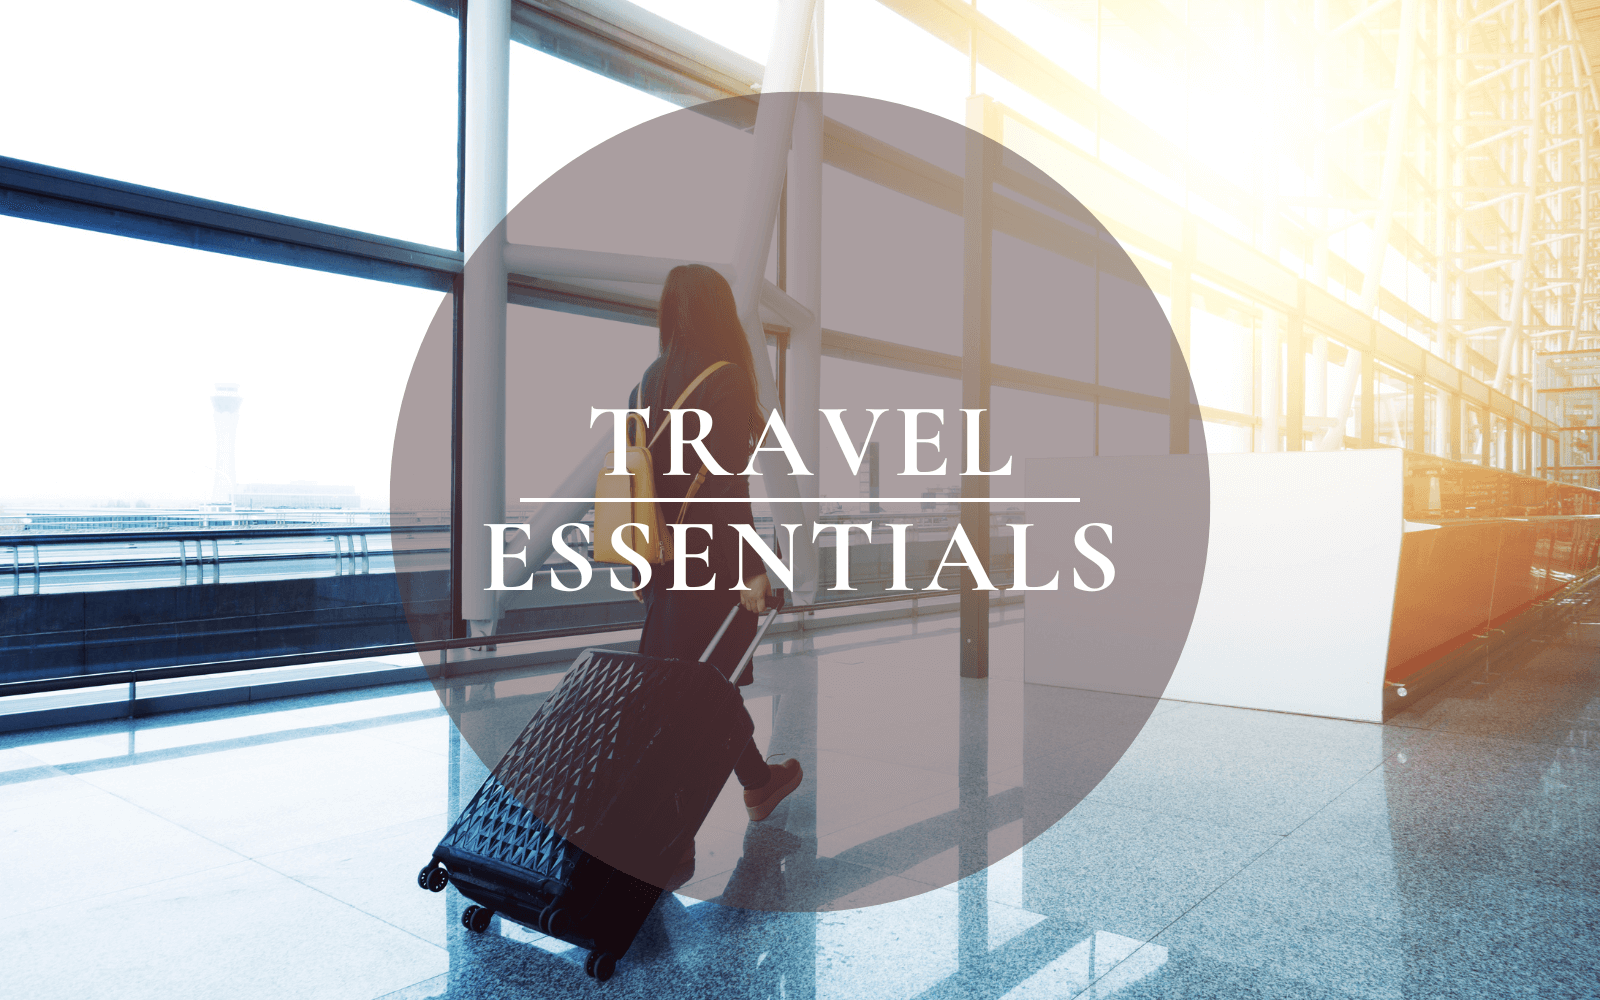 TRAVEL ESSENTIALS FOR YOUR NEXT VACATION